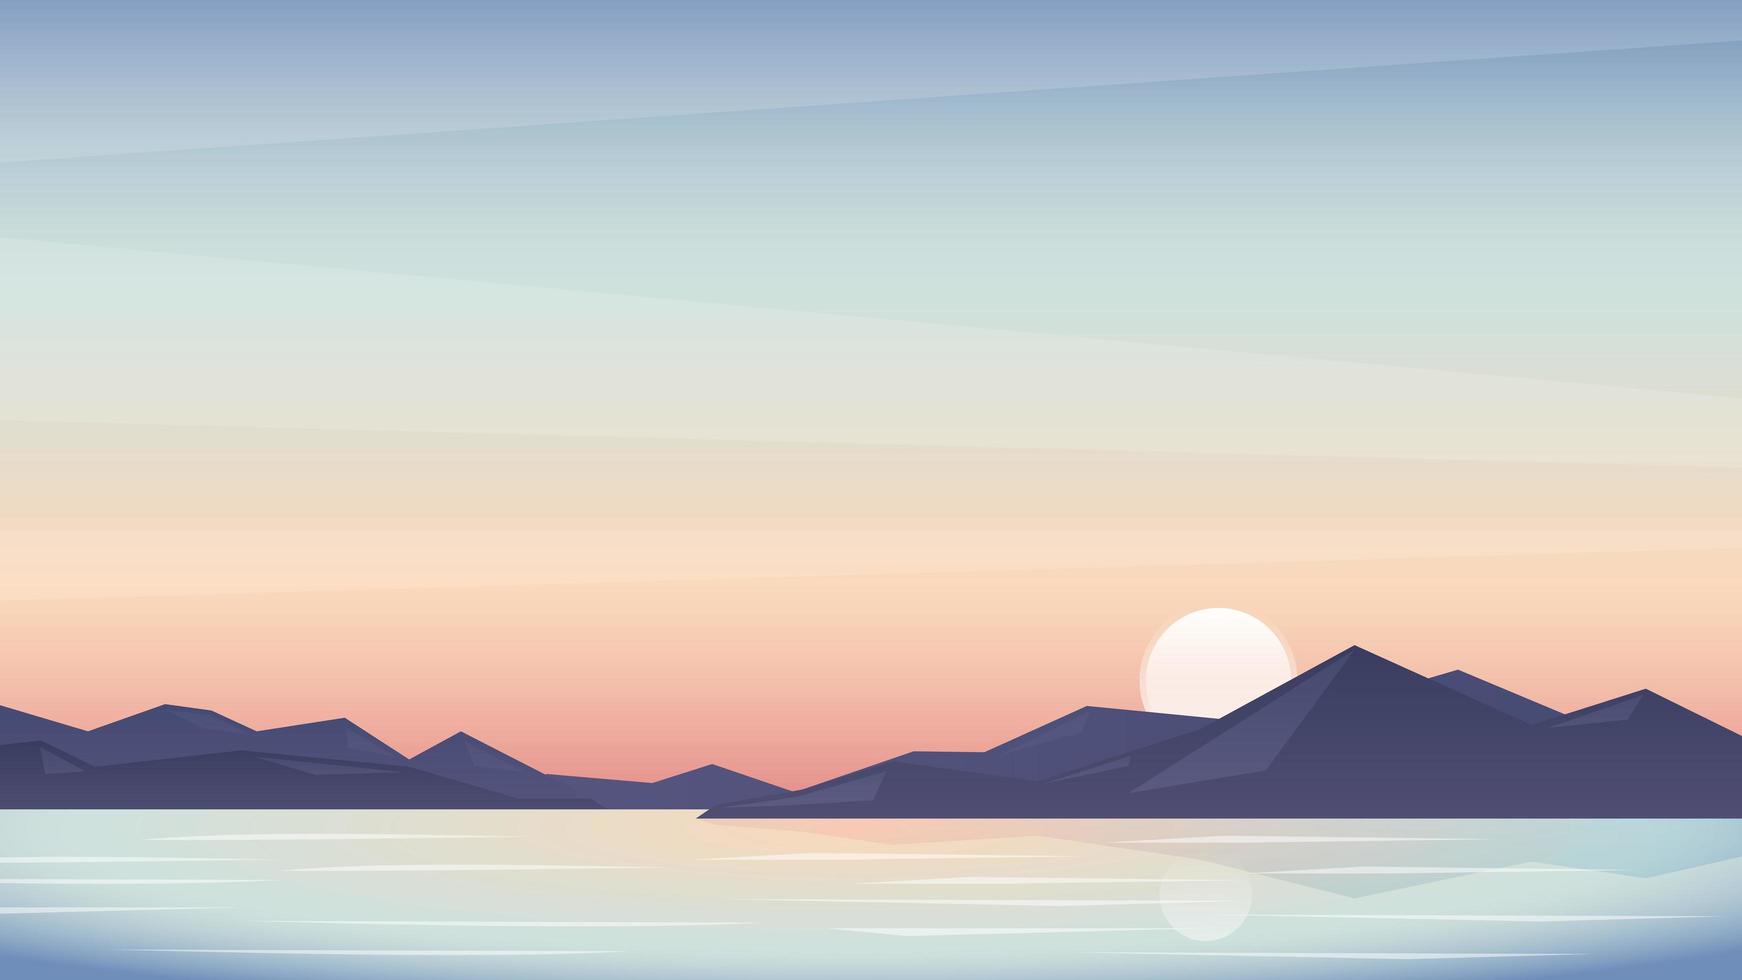 Sunset landscape background with mountains vector